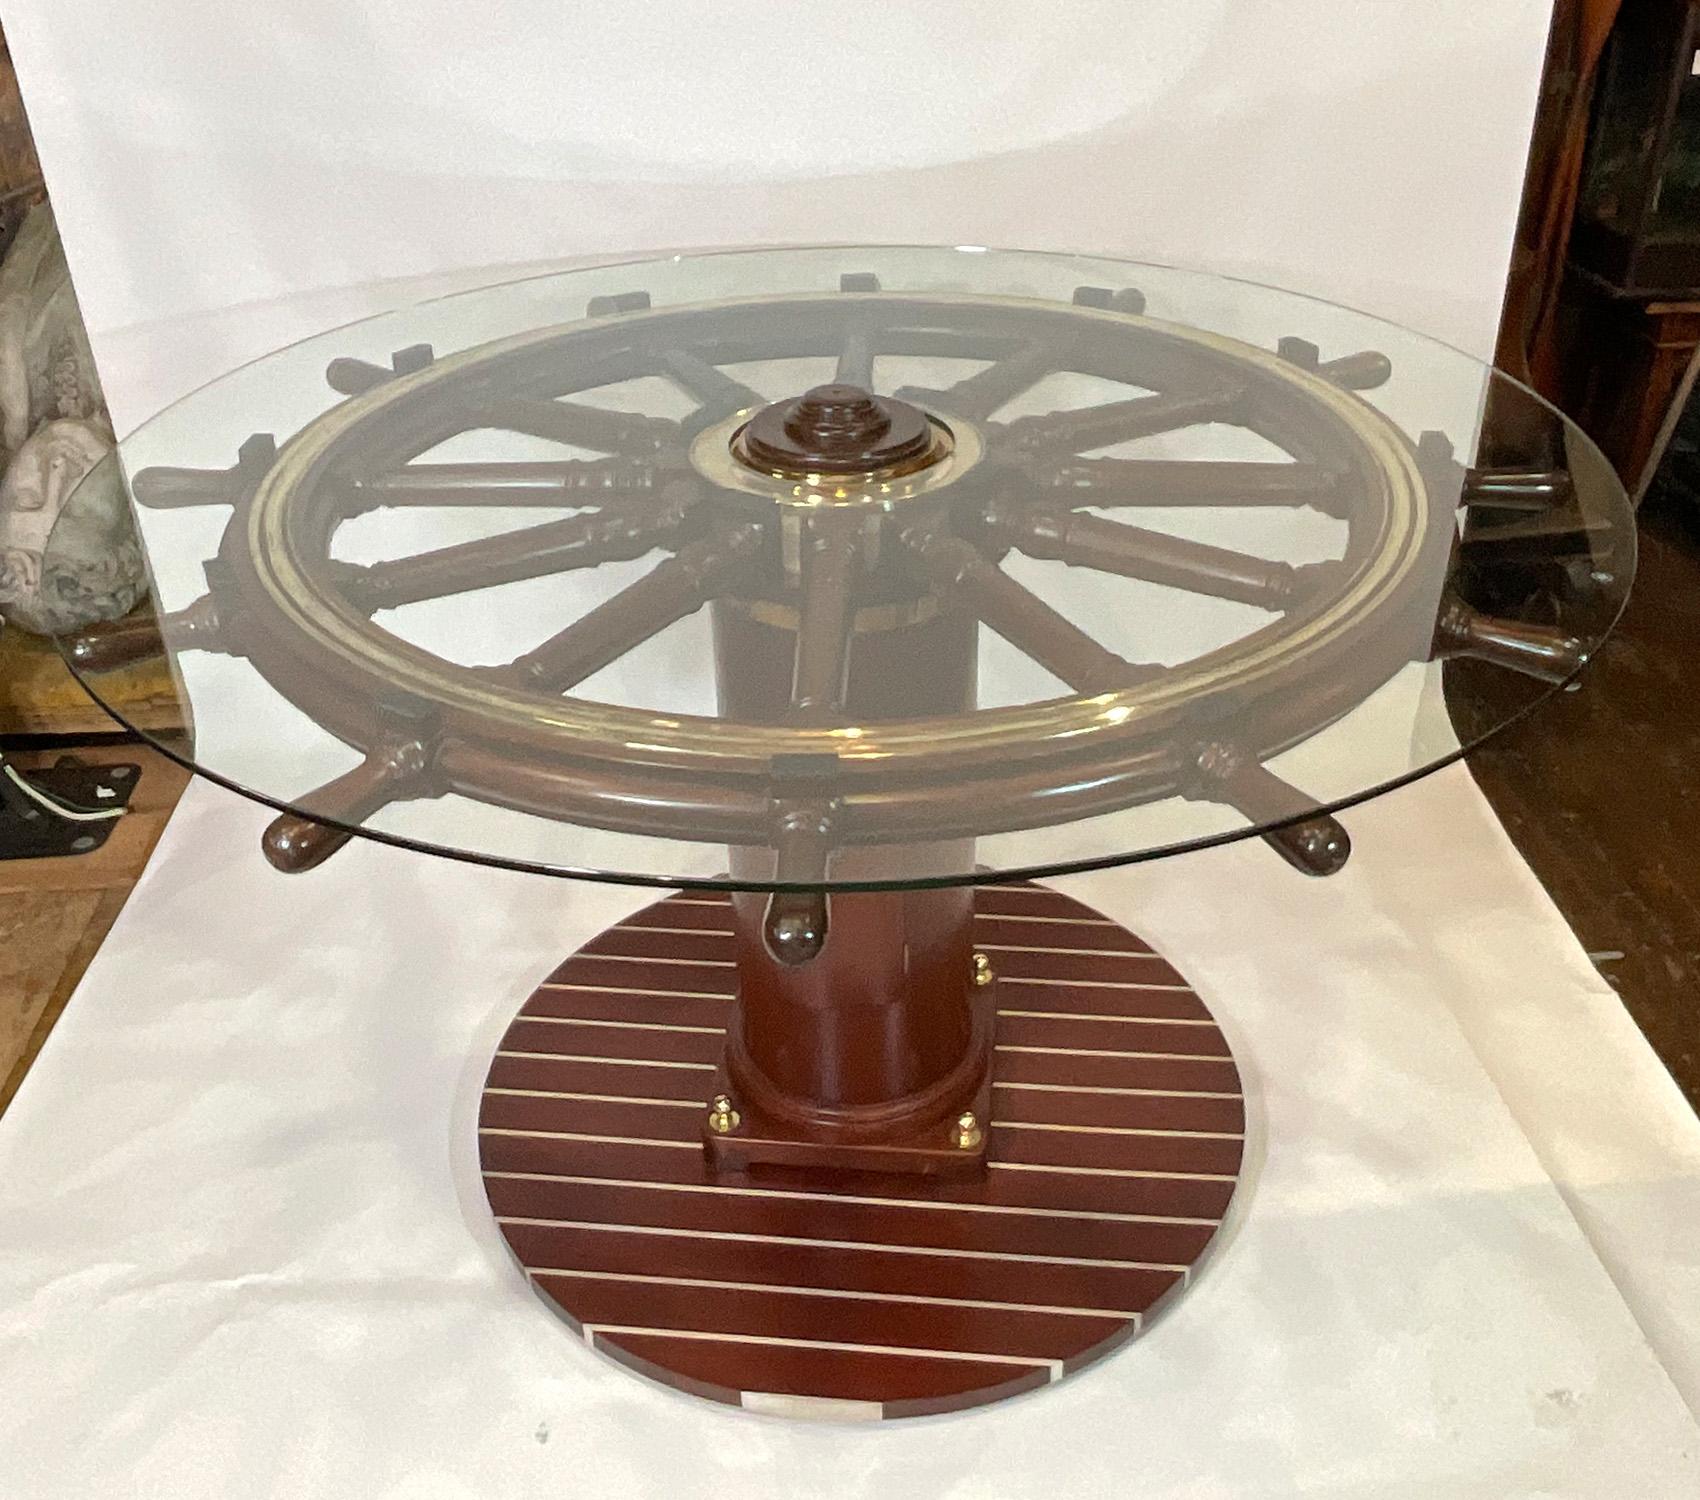 Outstanding antique ships wheel that has been mounted onto. turned spindles, solid brass hub with a thick wood base in the form of ships decking. The wheel has been meticulously restored. The wheel has twelve turned spindles. Solid brass hub with